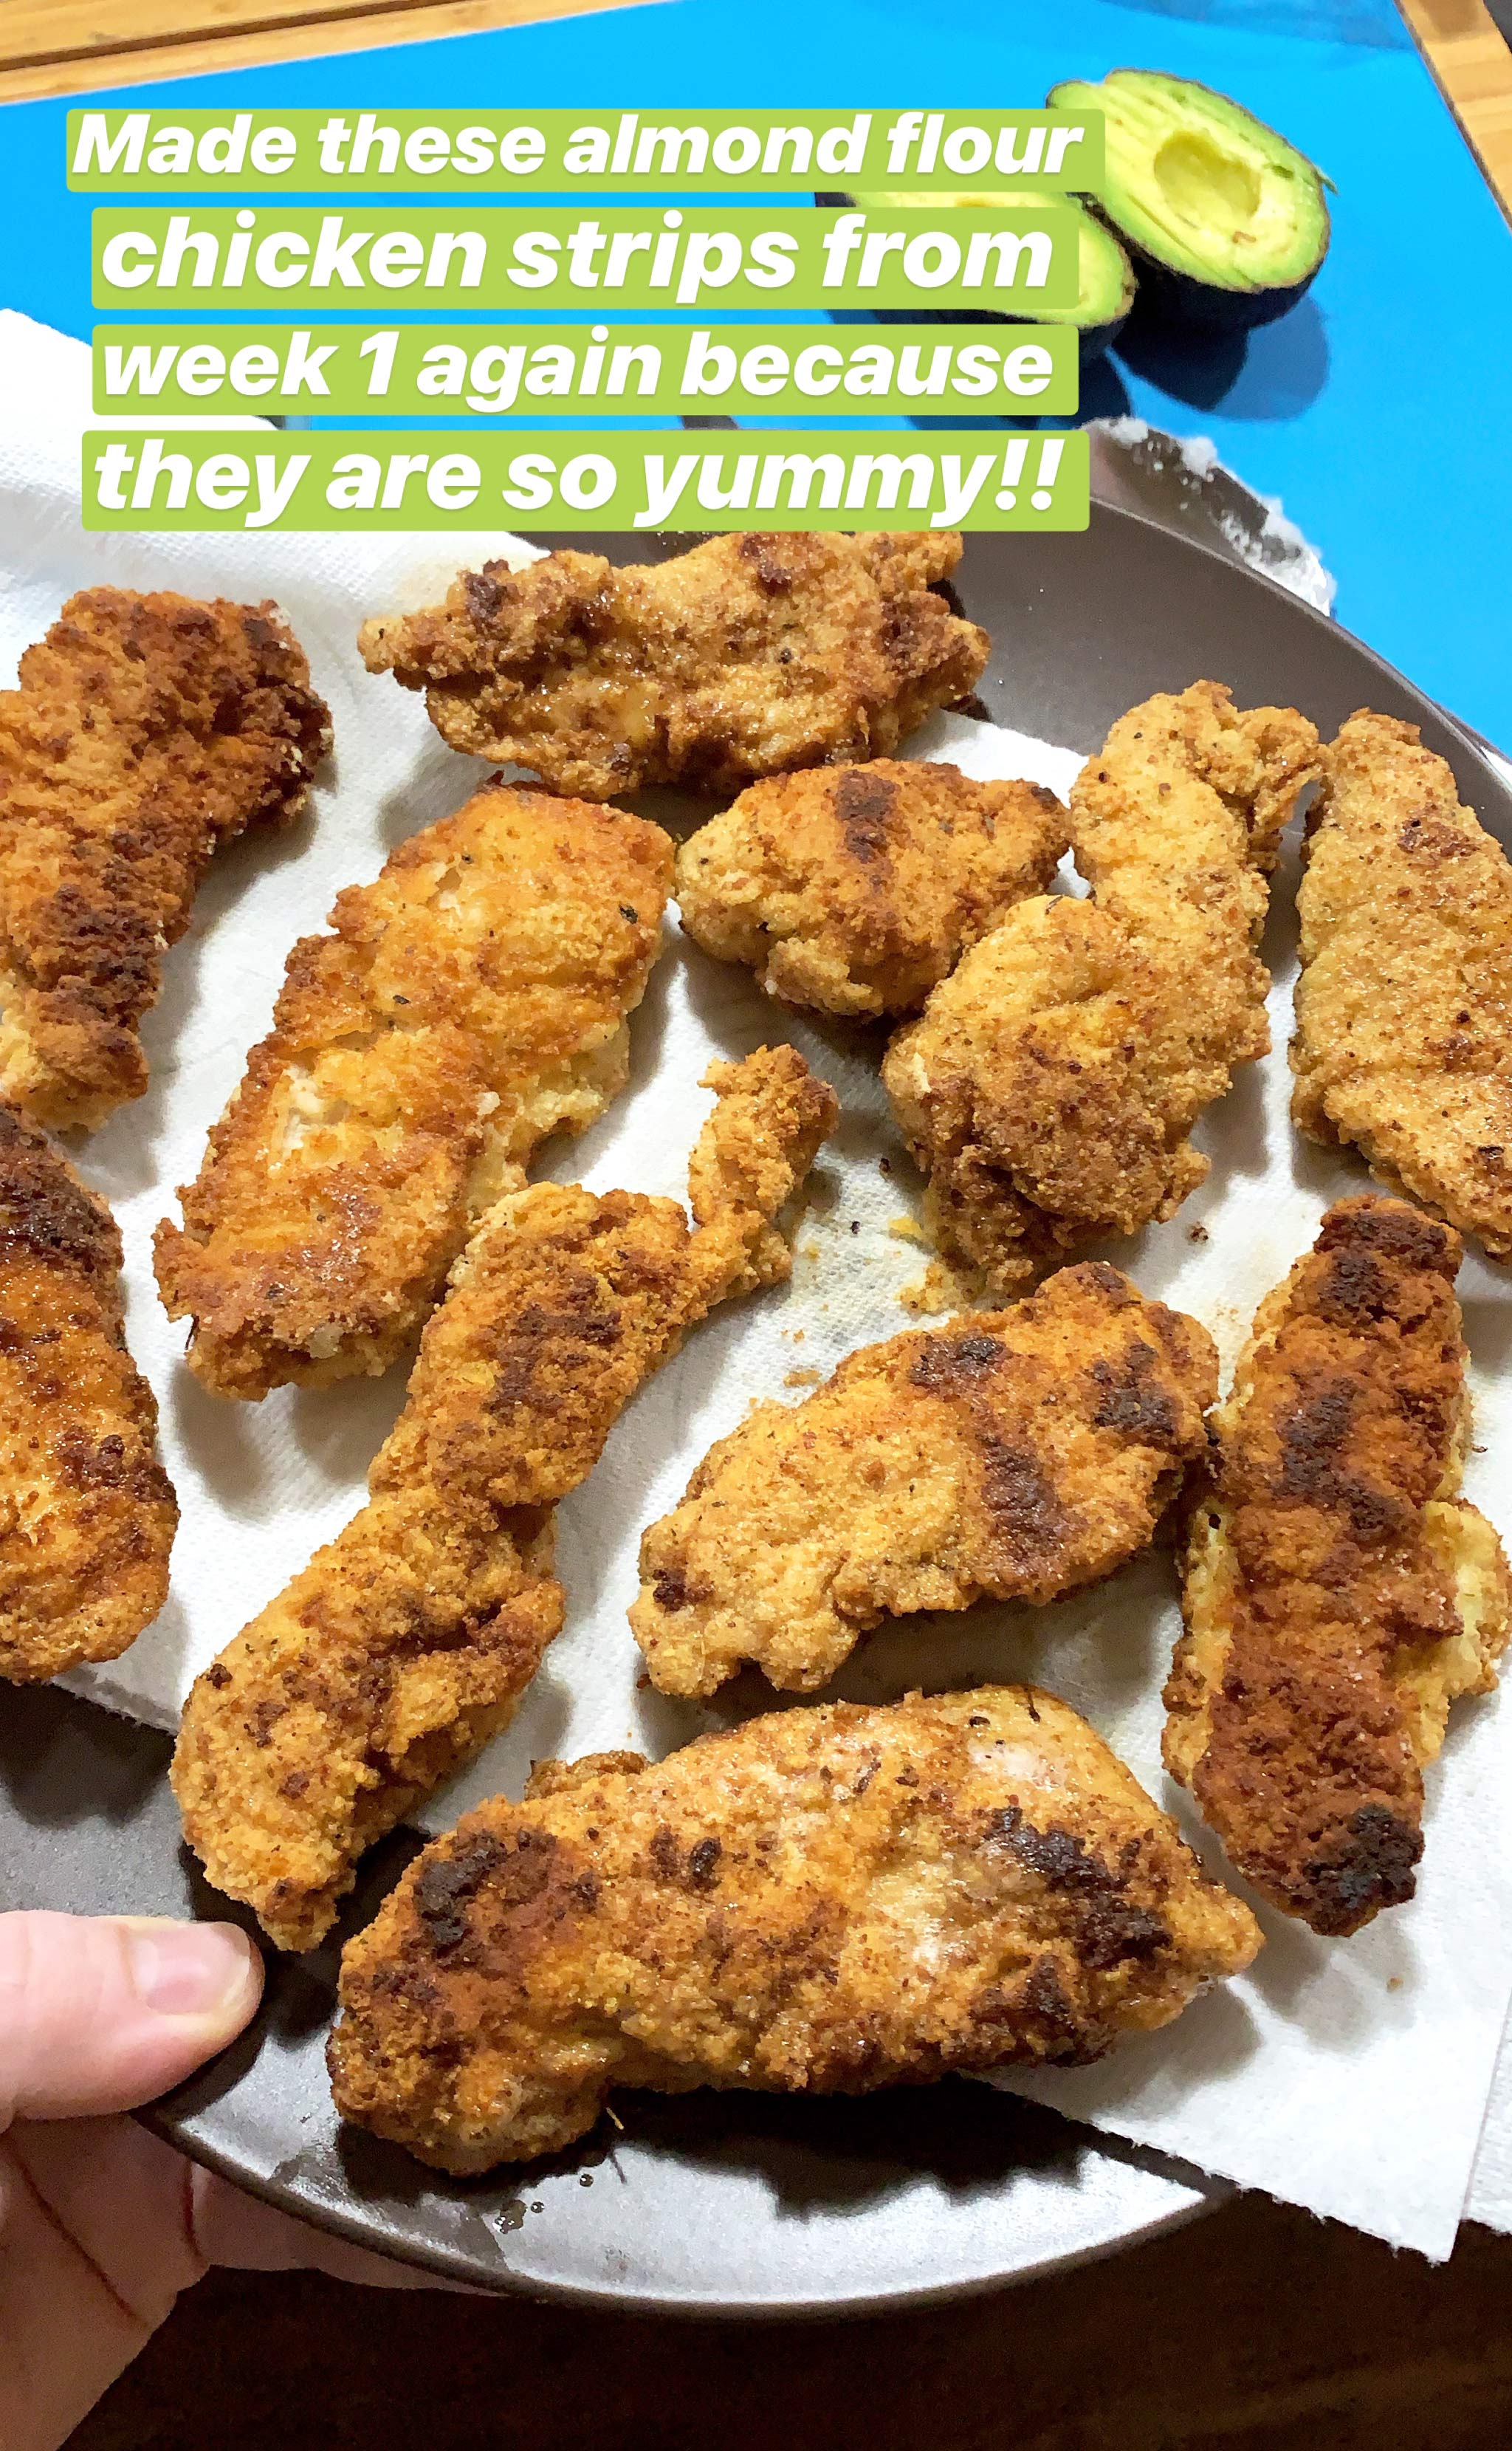 whole30 chicken strips are one of my favorite whole30 dinner recipes